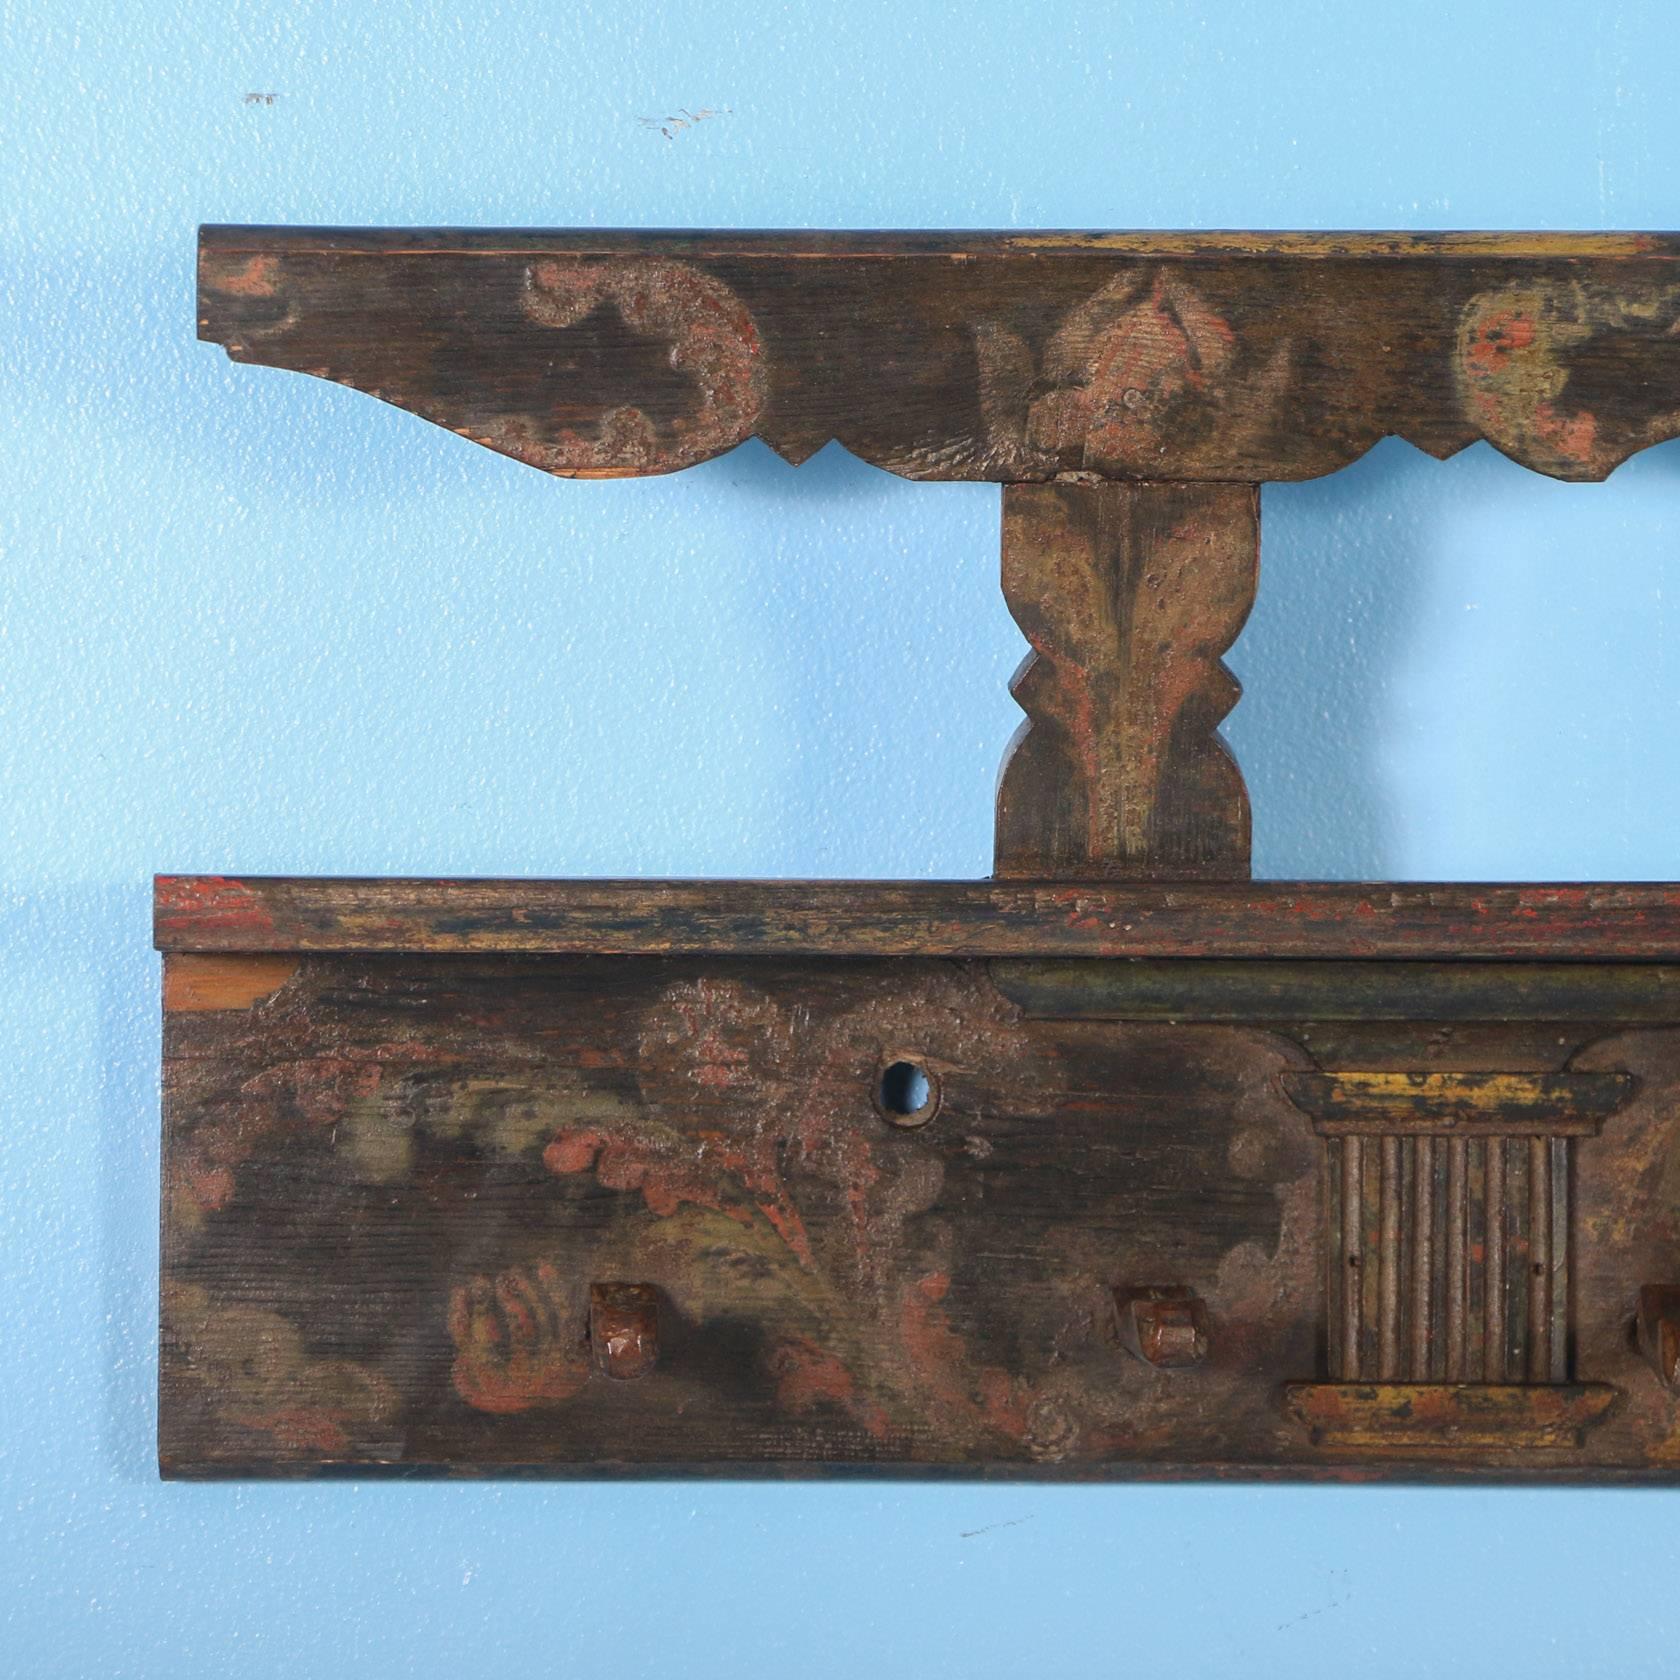 Antique Hungarian wall rack with original painted and carved details. The dark green hues almost look black, while the aged red flowers and flourishes were traditional folk art designs of the period. The 10 wood pegs were hand carved and are ready